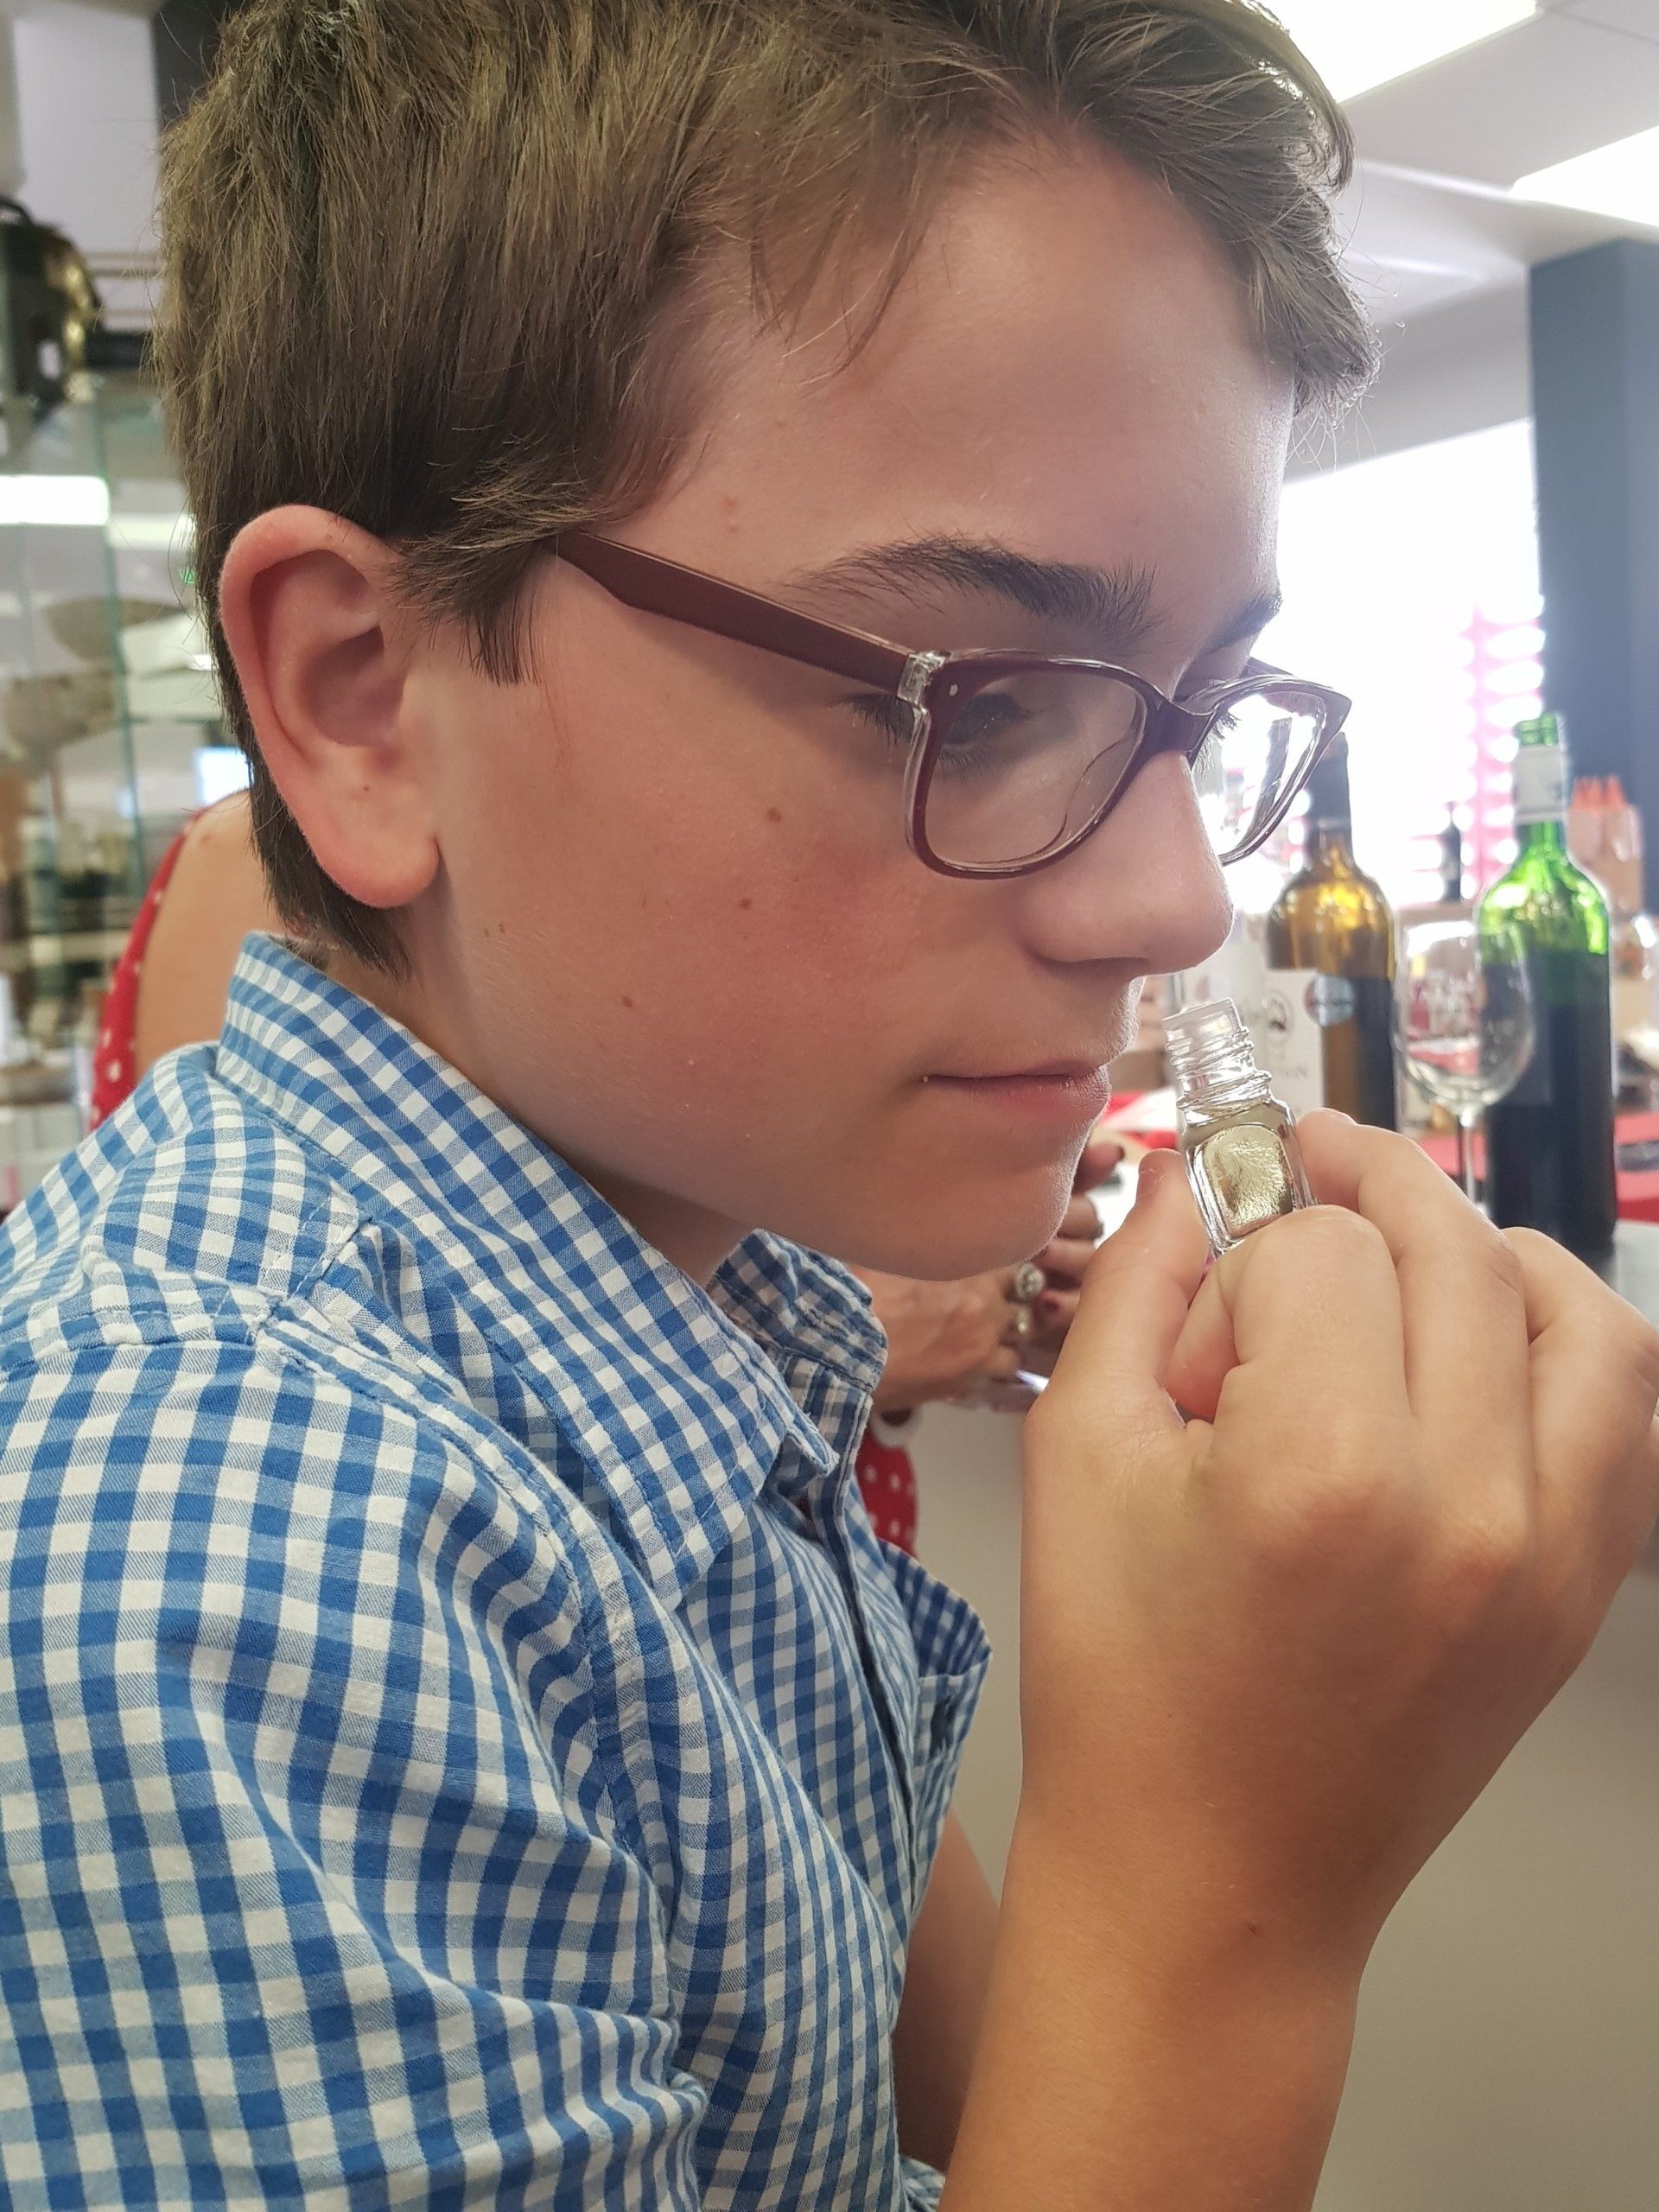 a boy sniffing a bottle containing wine scents